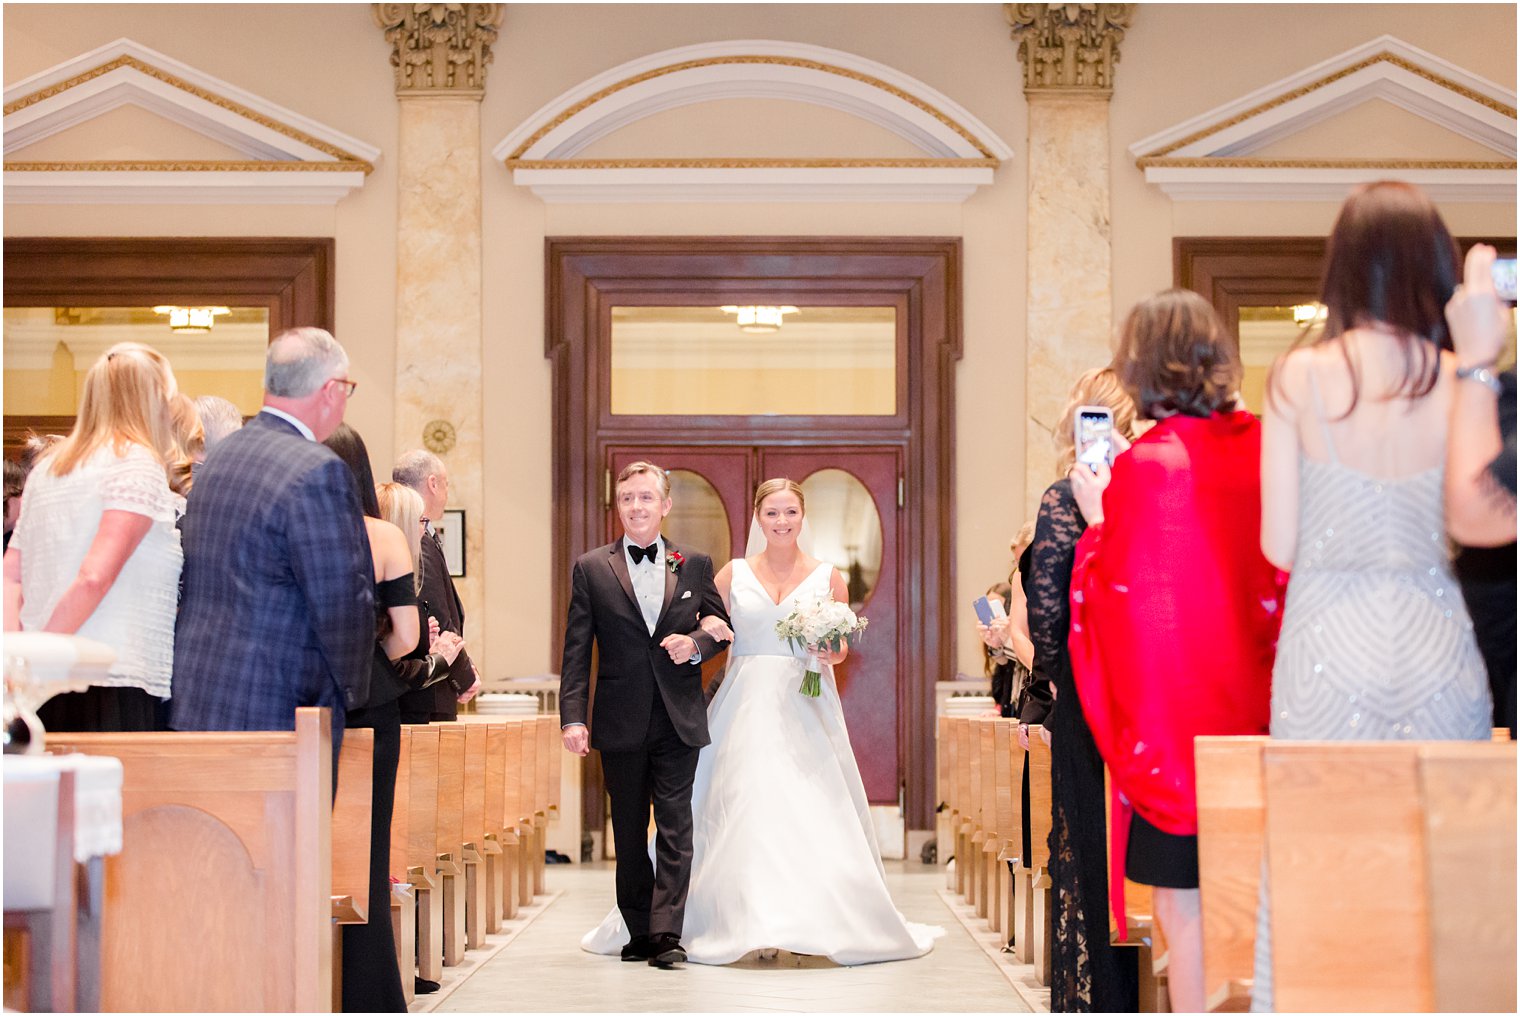 bridal processional at Church of the Immaculate Conception in Montclair, NJ